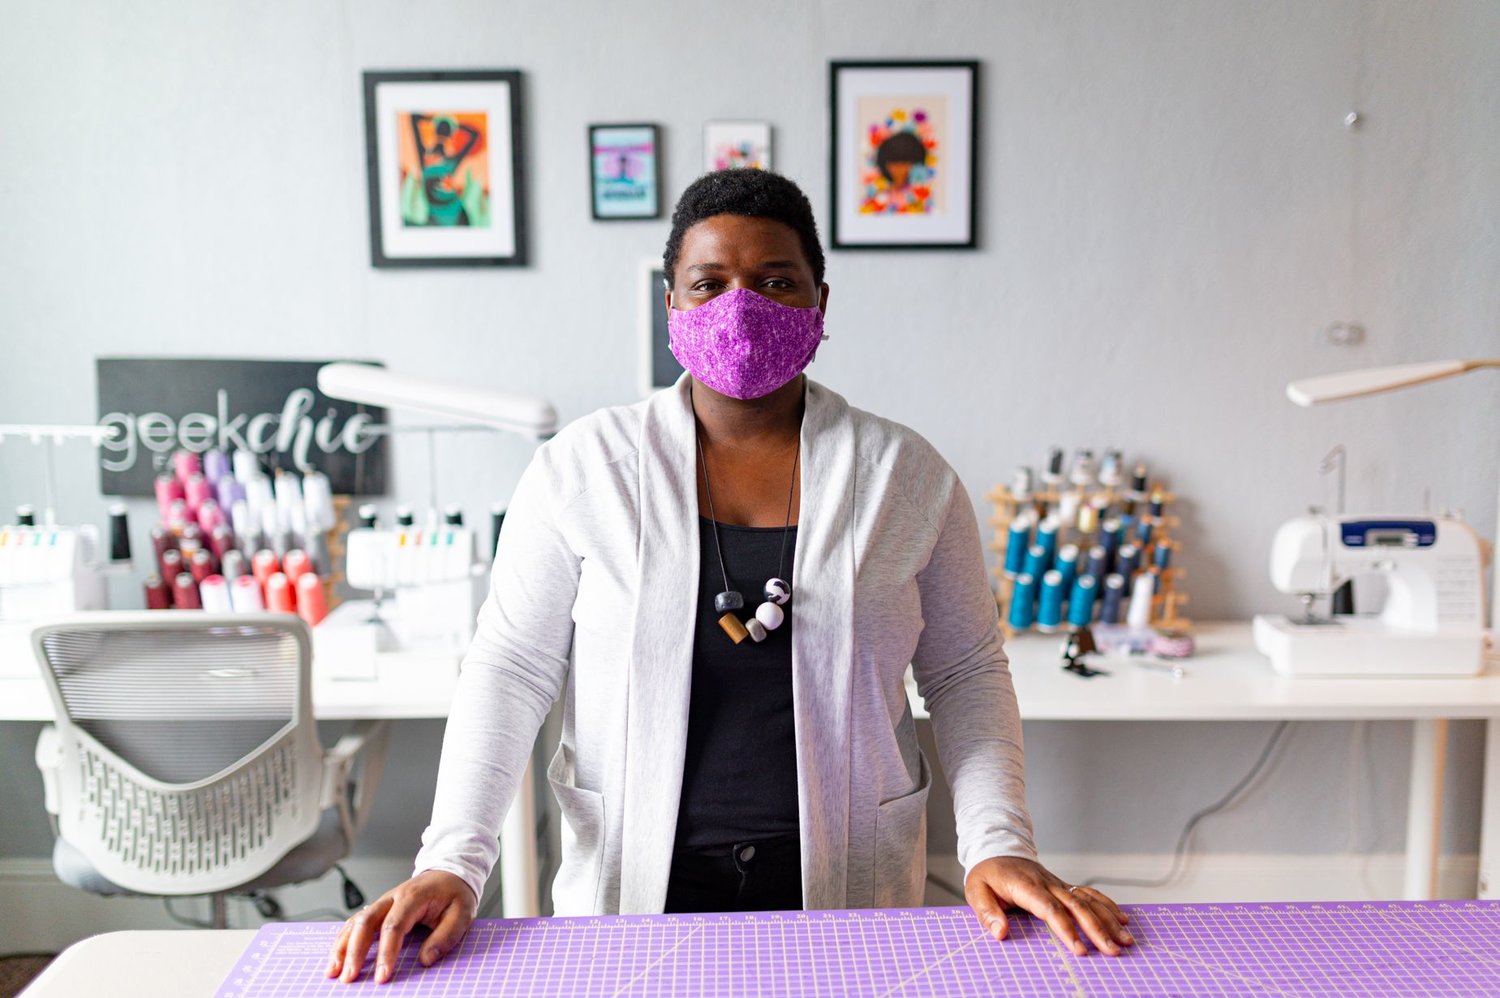 Lysandra Weber stands at her cutting table in her then-recently purchased studio in downtown Pittsboro last February. Weber is the founder and owner of Geekchicfashion, a clothing store featuring modern, comfortable and handmade designs.